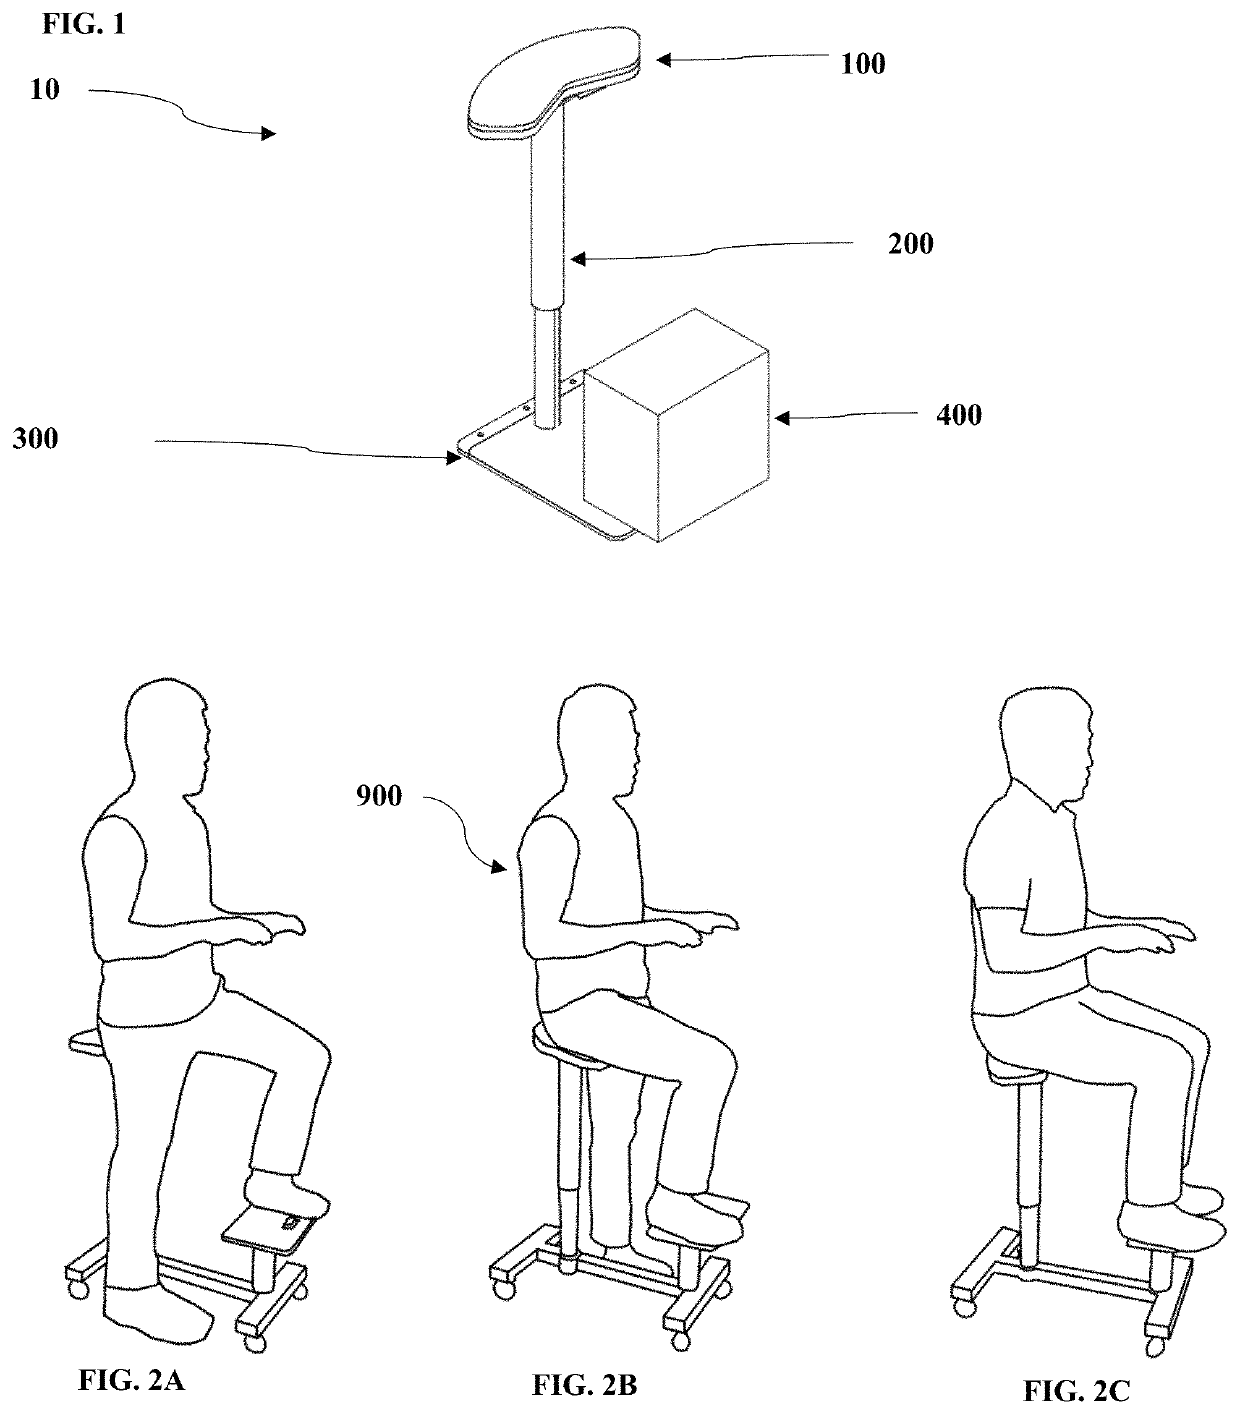 Half-sitting stool with supported sit bone